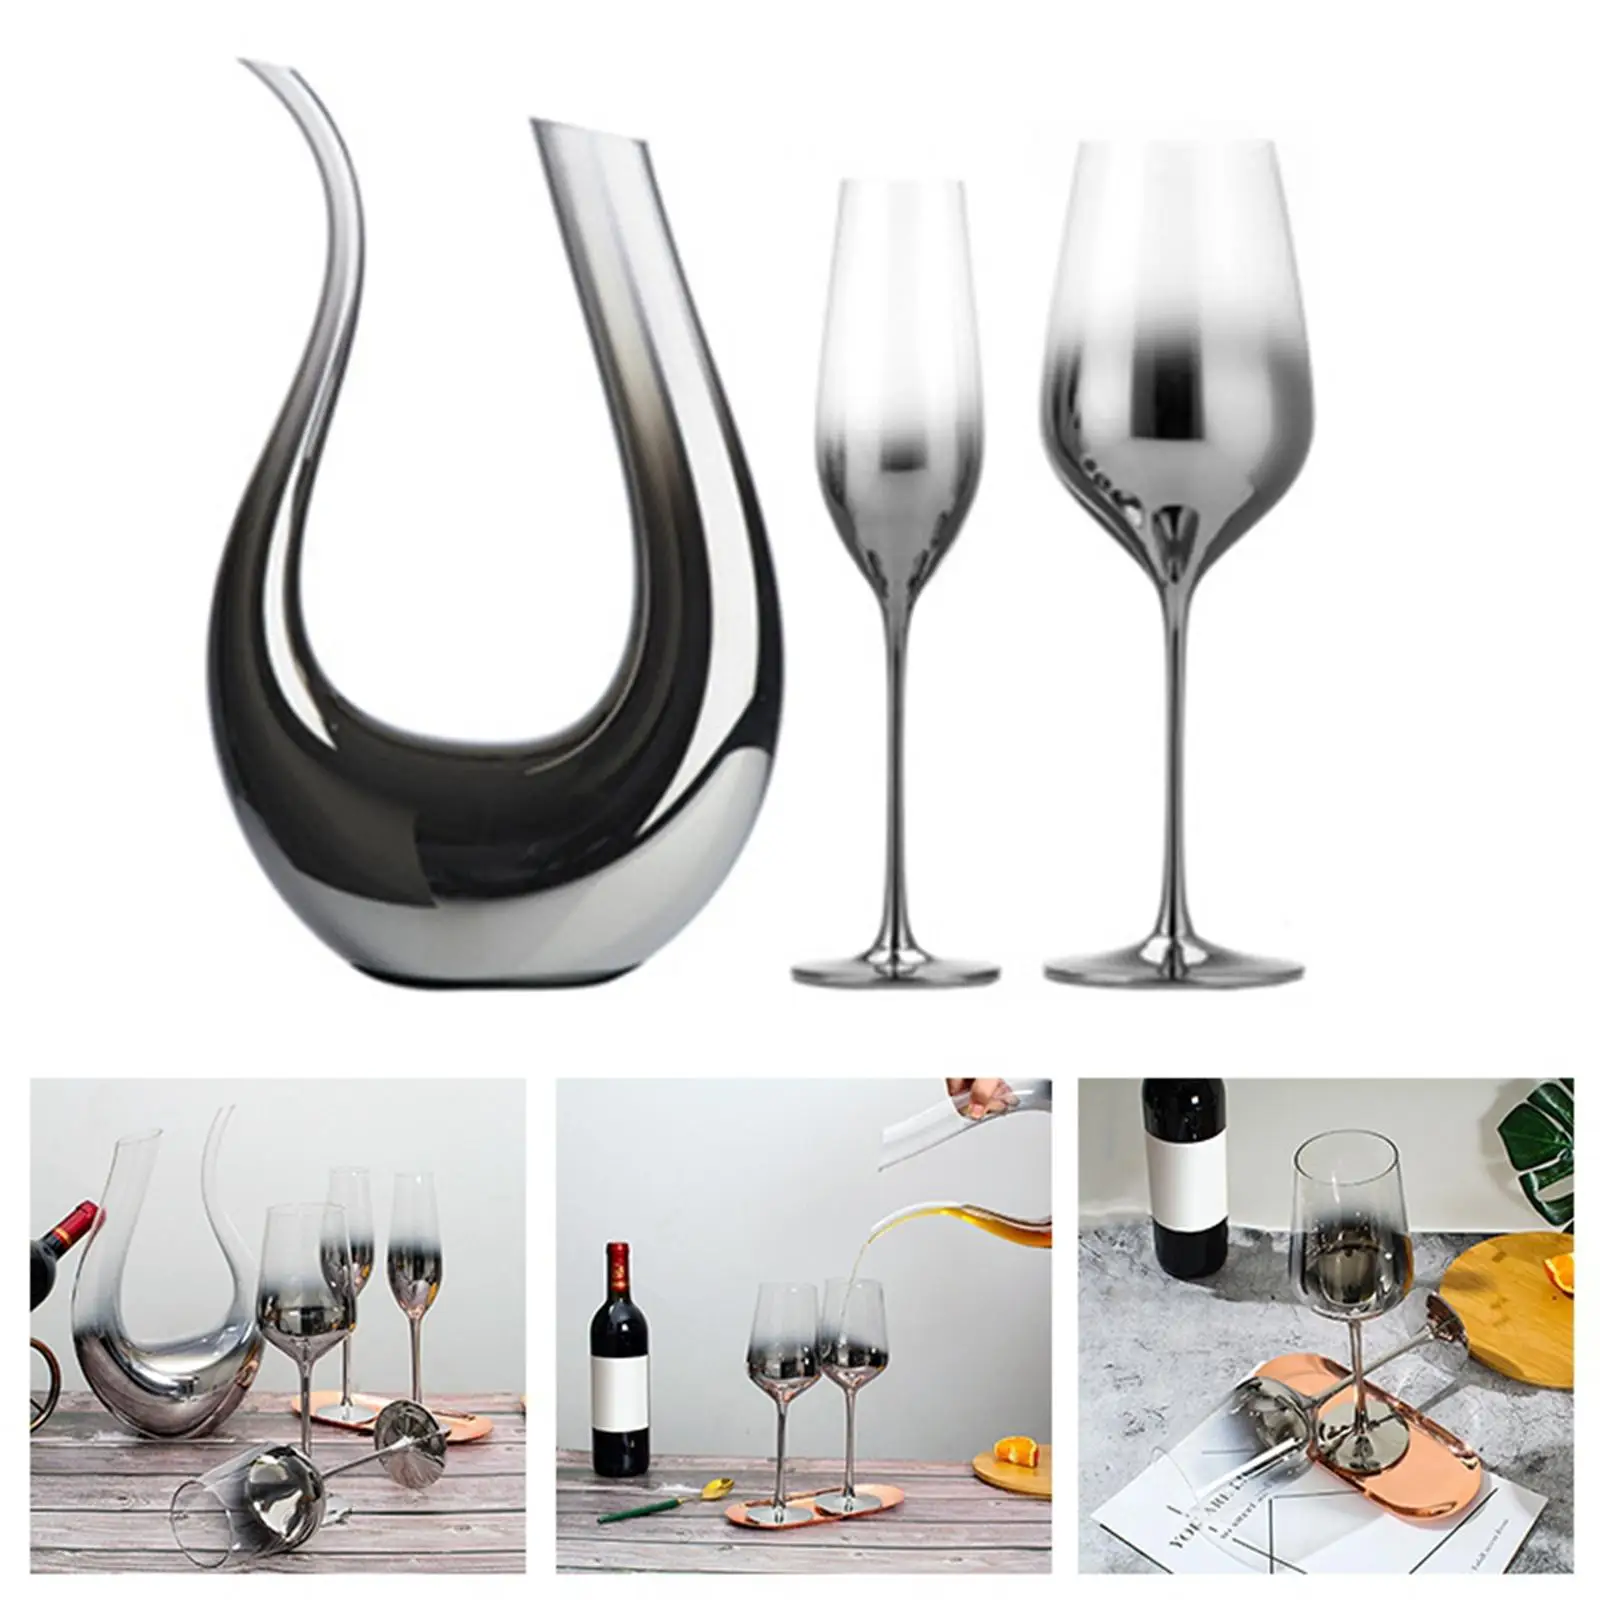 Cryatal wine Aerator Artificially Blown Gradient Wine Separator with Slanted Spout wine bottle for Restaurant Bar